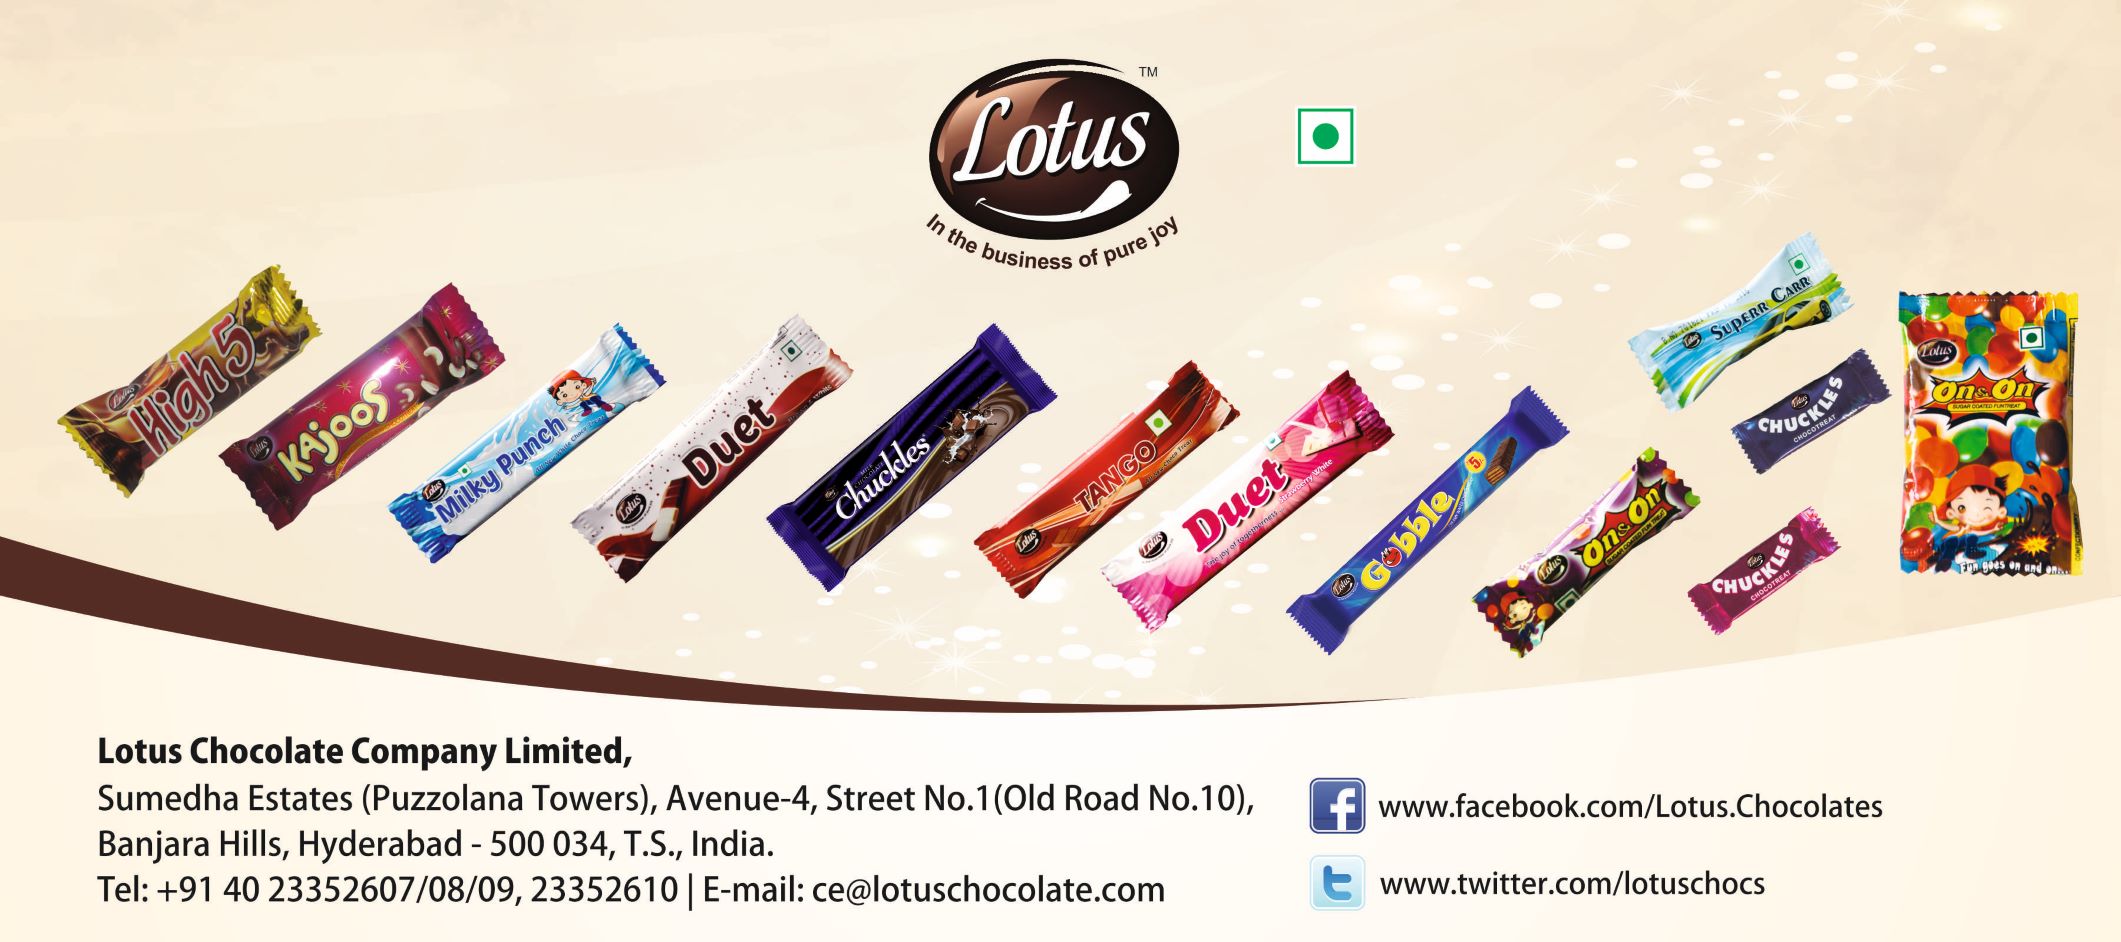 Reliance Consumer Products Ltd. to Acquire 51% Controlling Stake In Lotus Chocolate Company Ltd